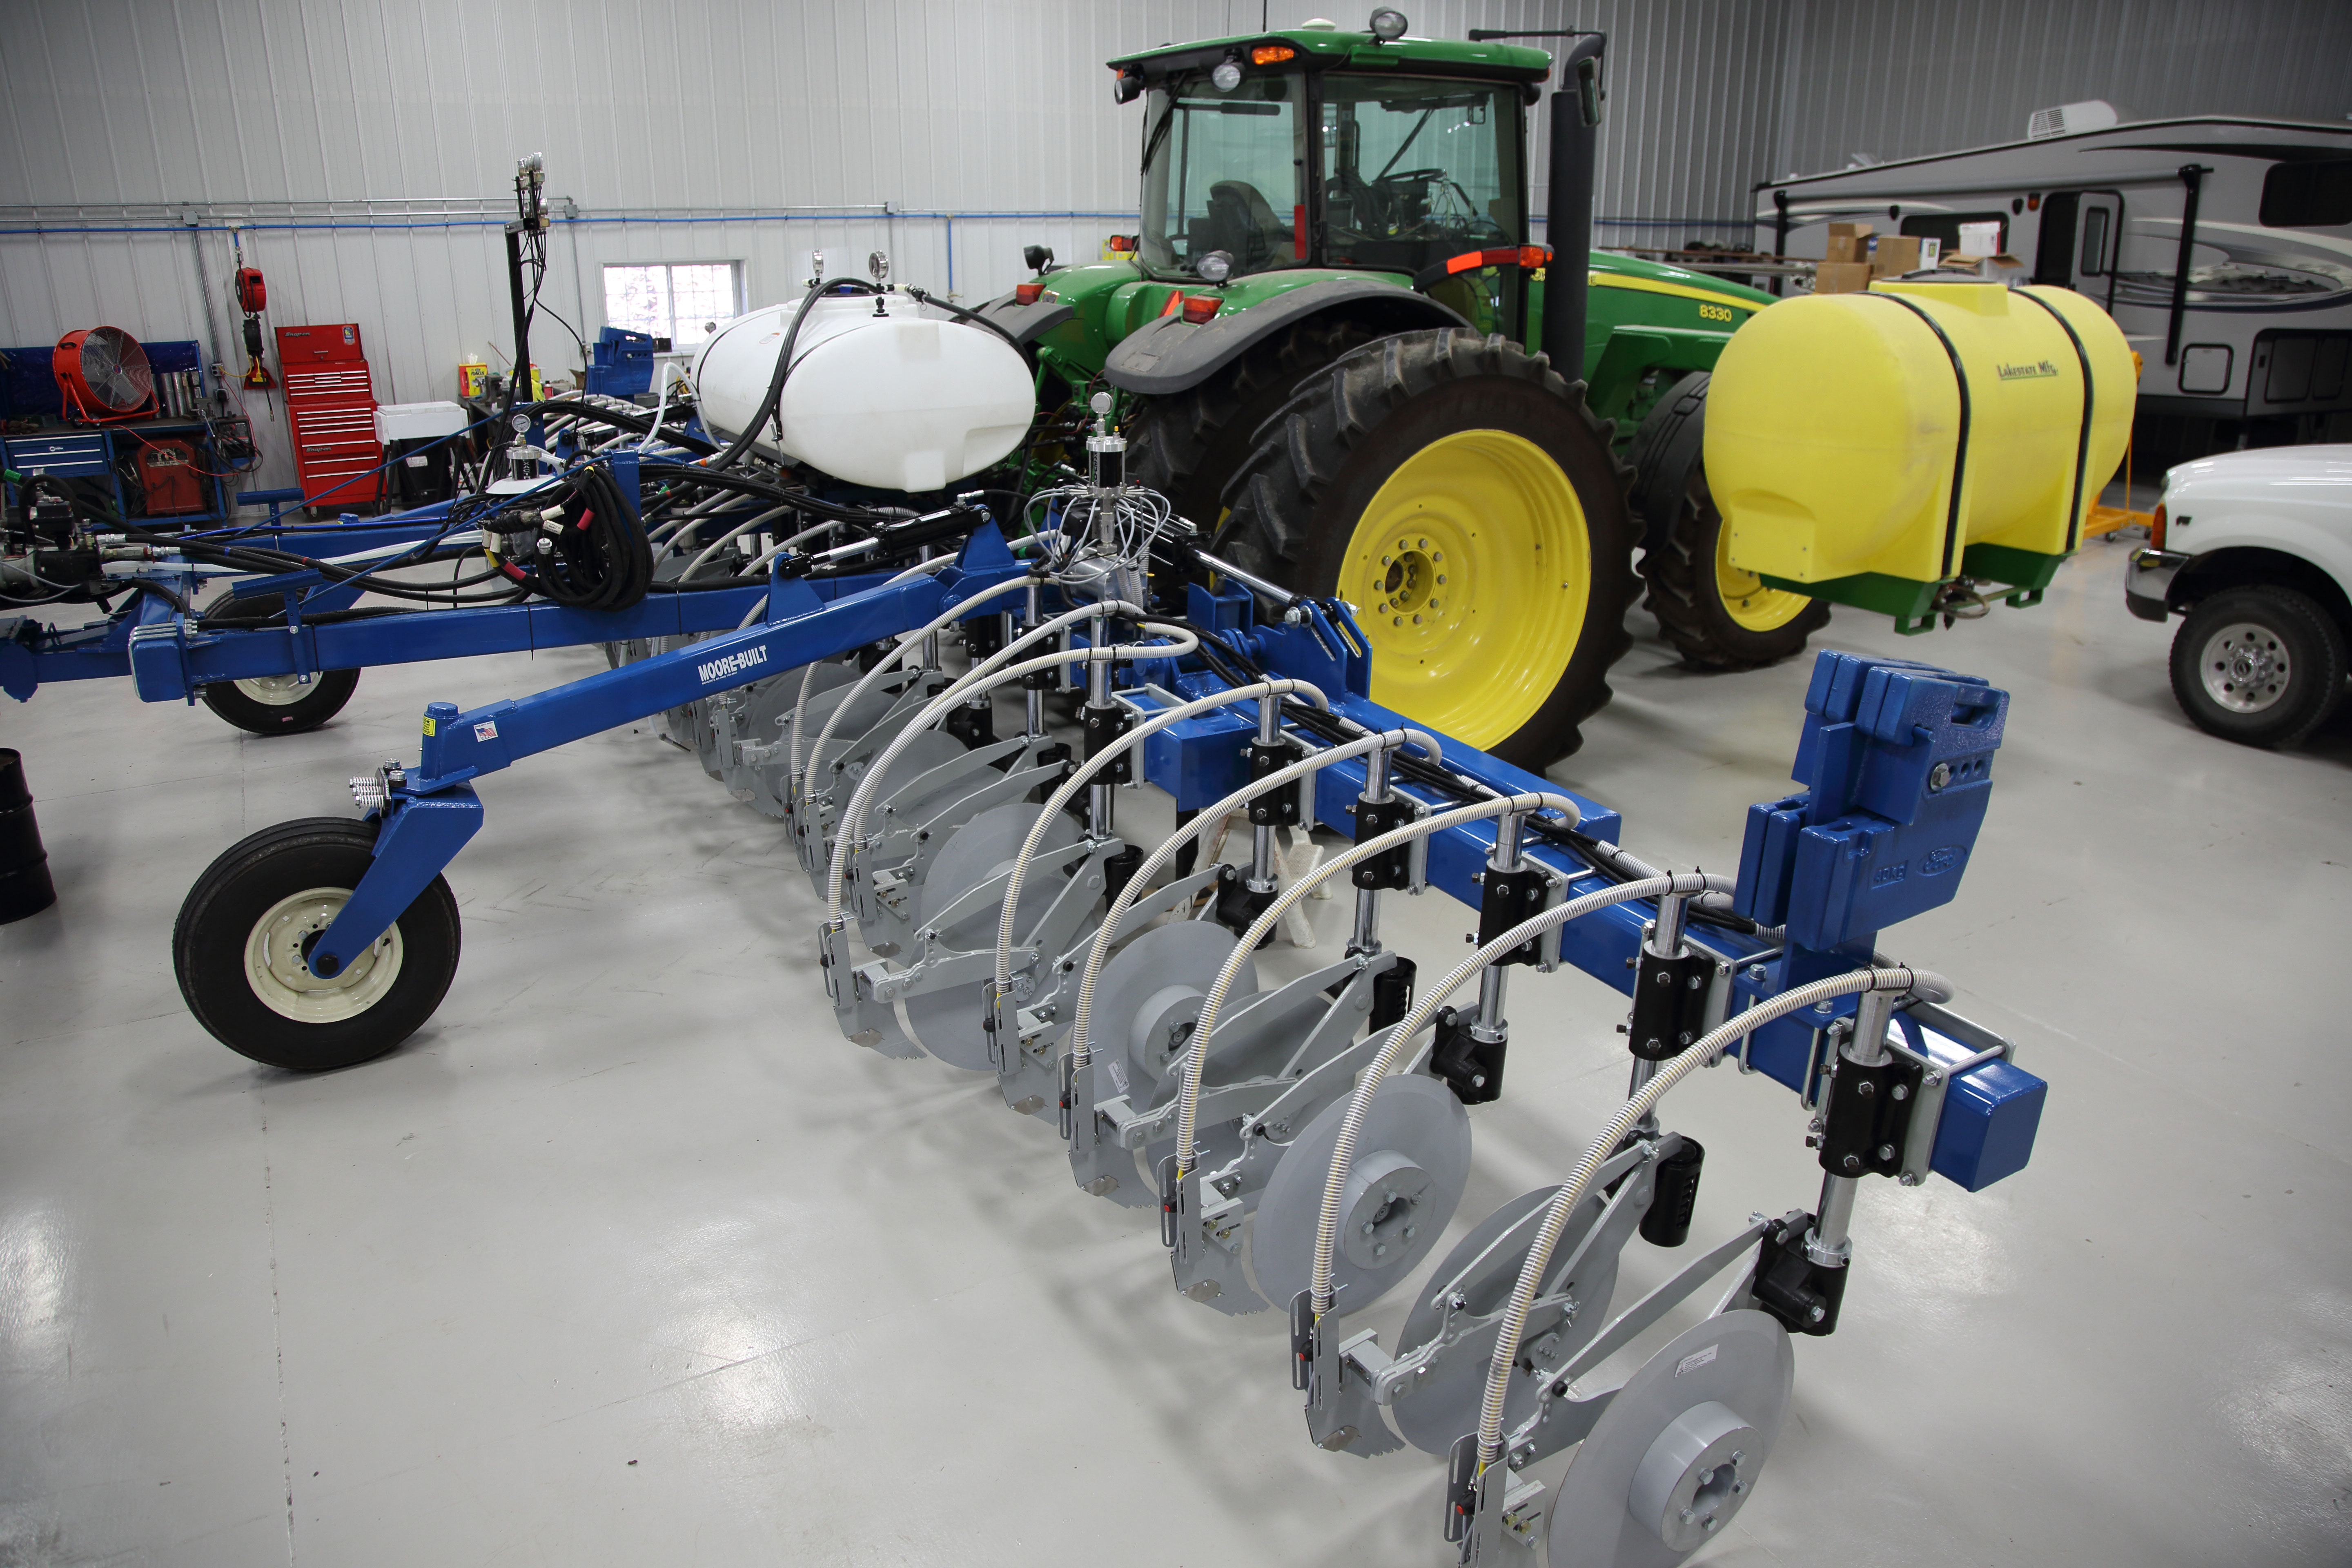  Mustang Openers in No-tillage drives yields and improves the margin